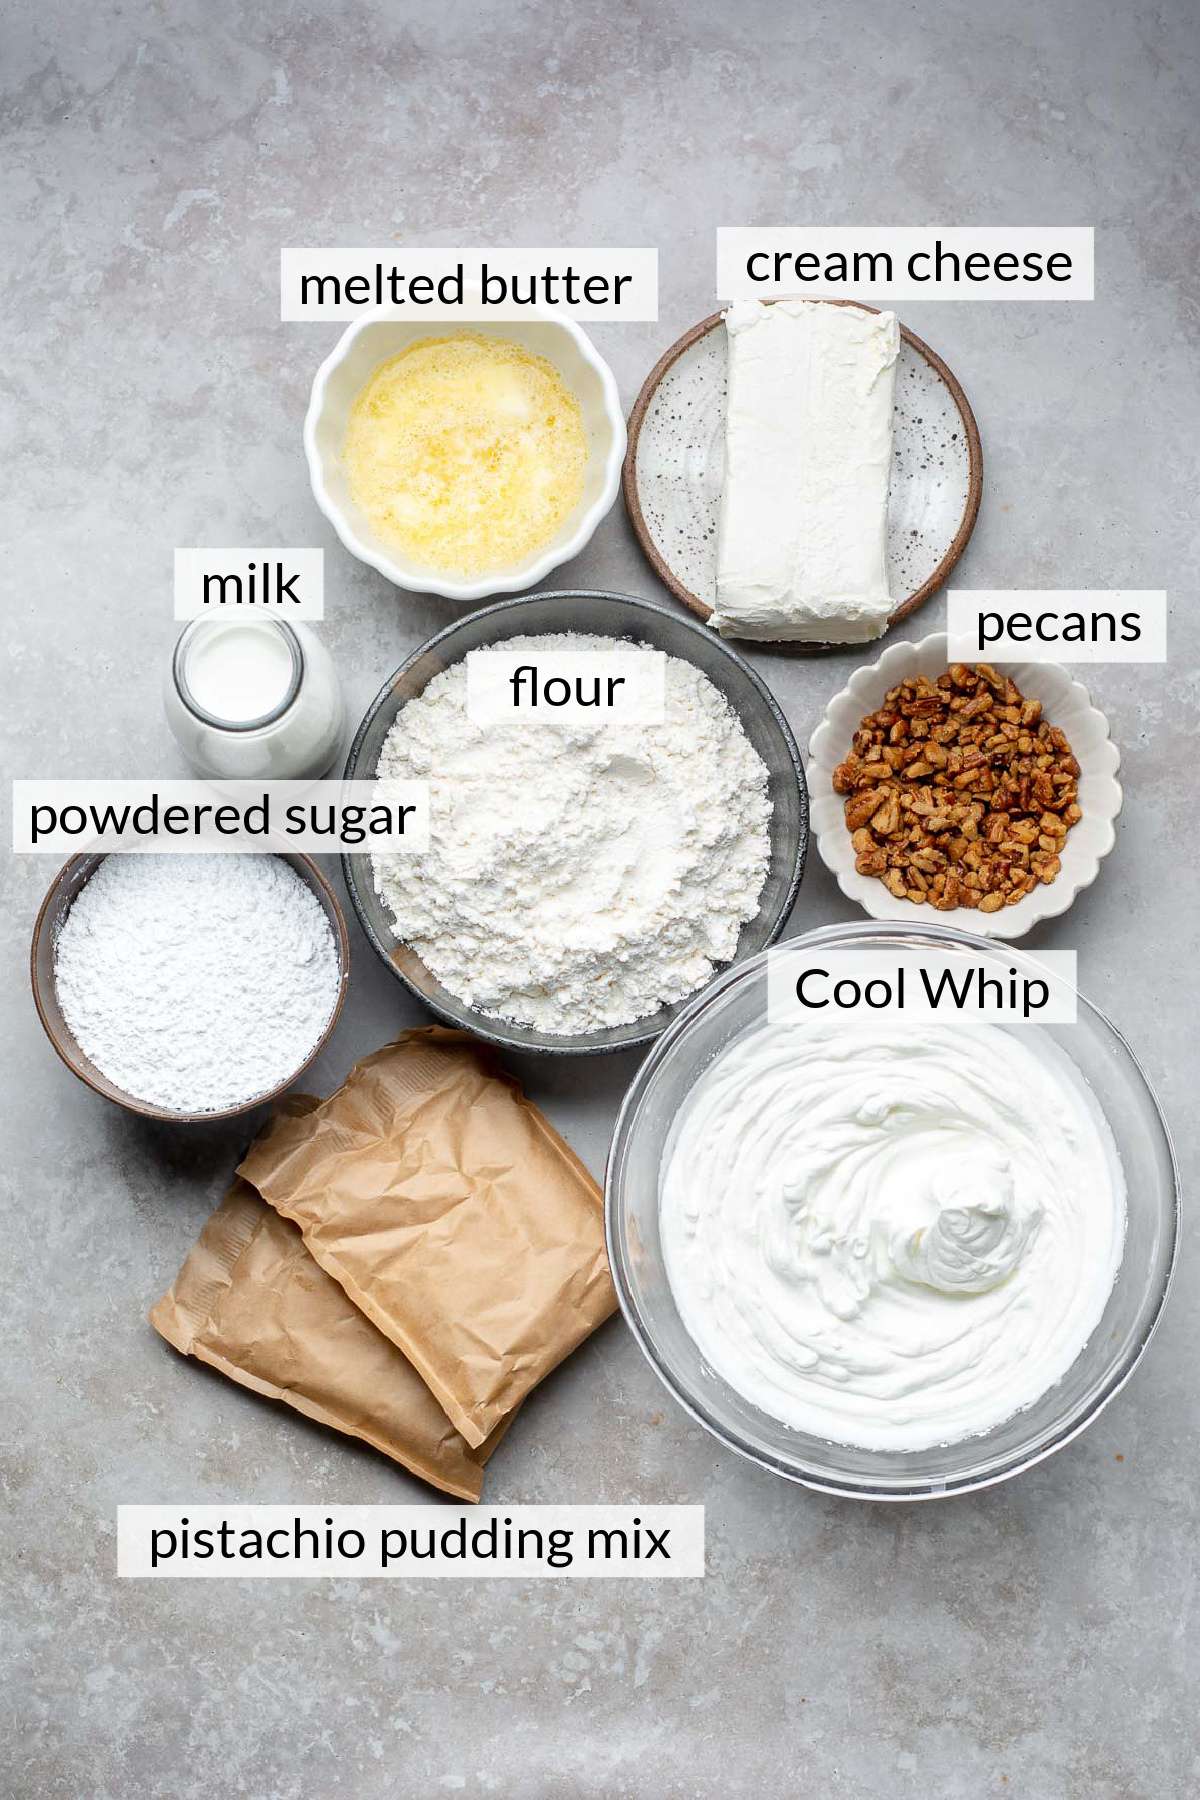 Packets of pudding mix, bowls of melted butter, milk, pecans, powdered sugar, flour and cream cheese.